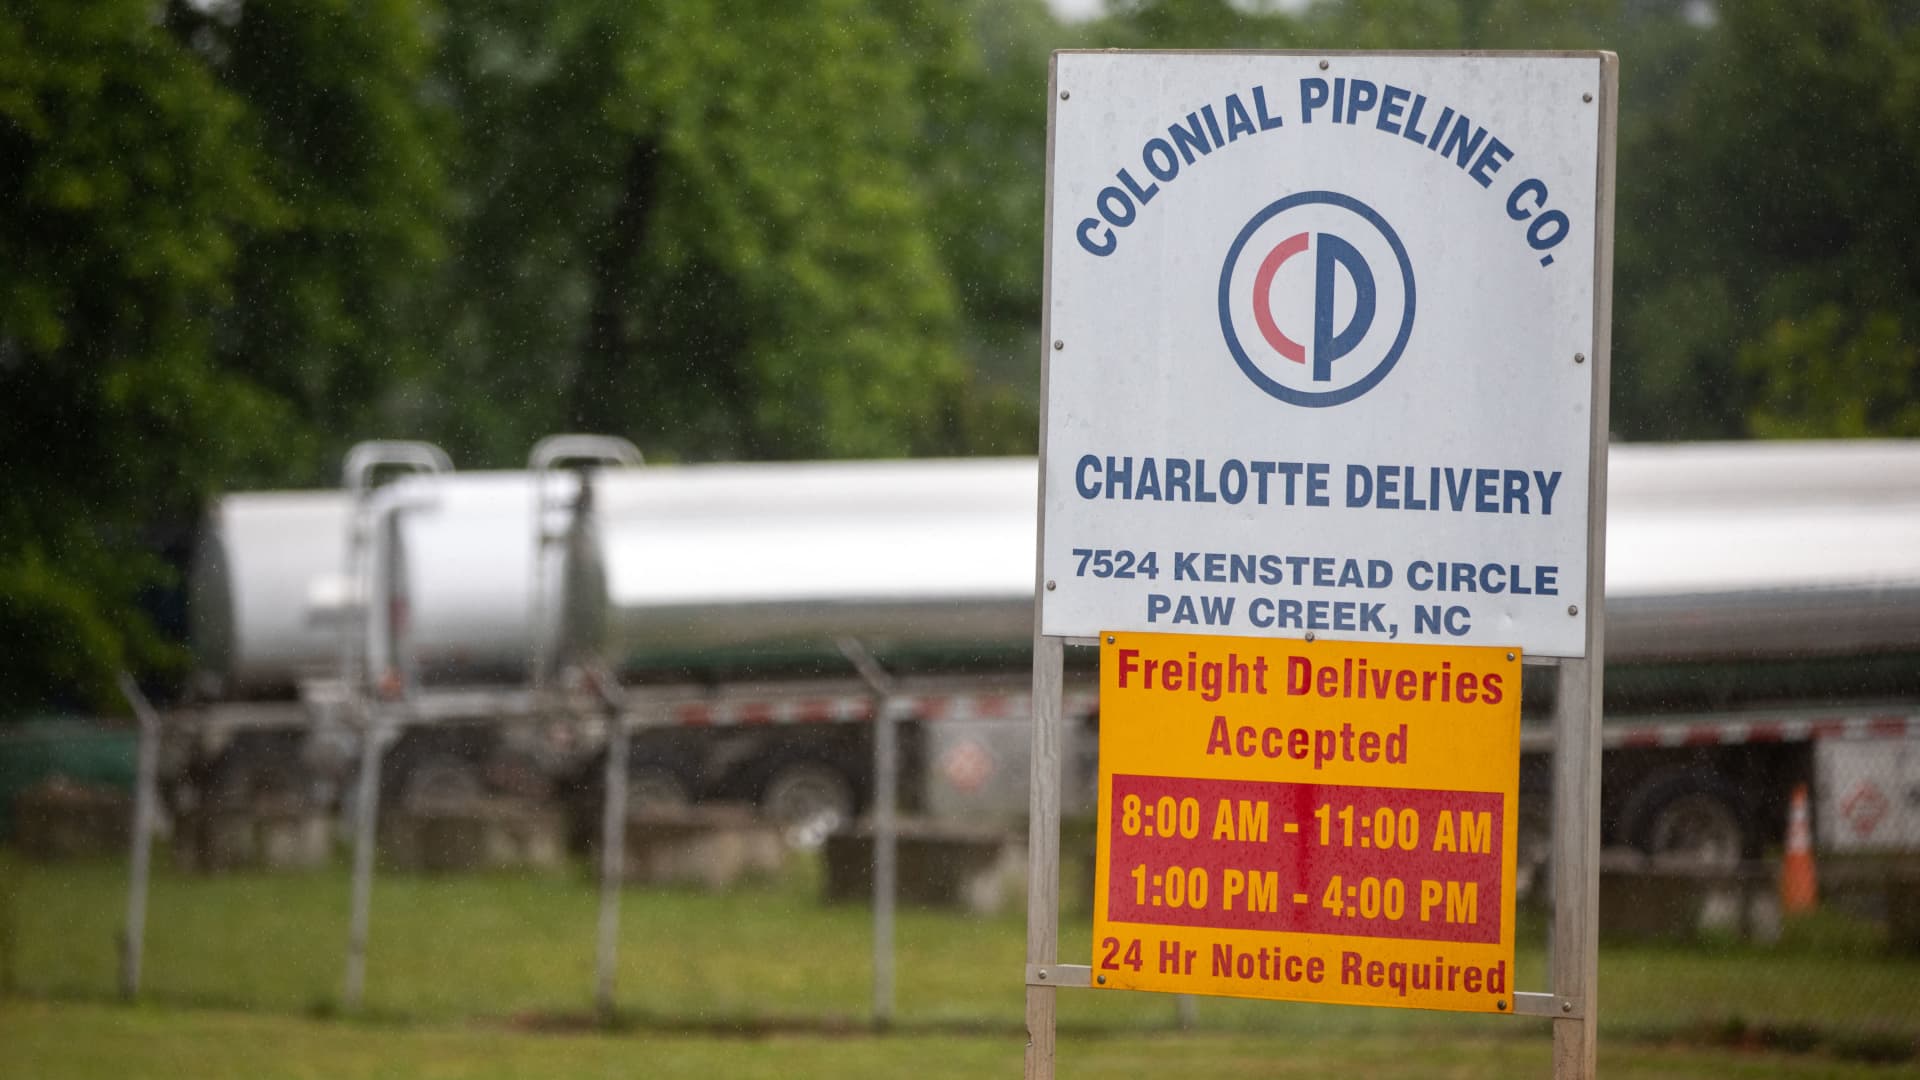 Tanker trucks can be seen in an adjacent lot next to the entrance of the Colonial Pipeline tank farm in Charlotte, North Carolina on May 12, 2021.